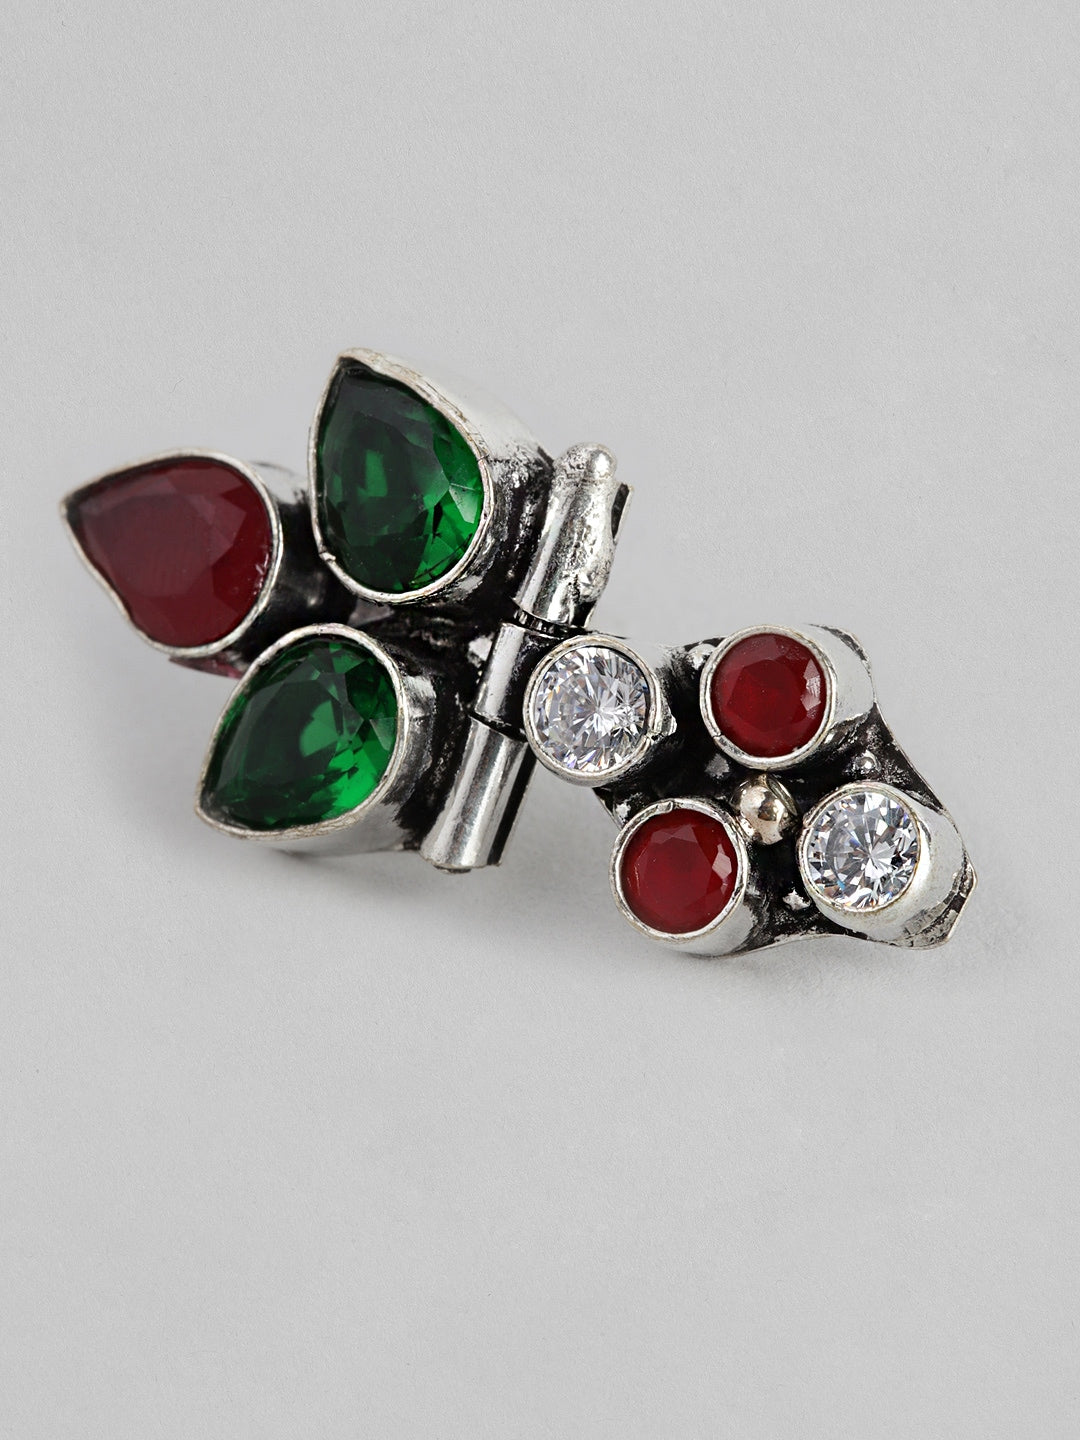 EL REGALO Green & Red Seven Stone Studs Earrings - for Women and Girls
Style ID: 16287436